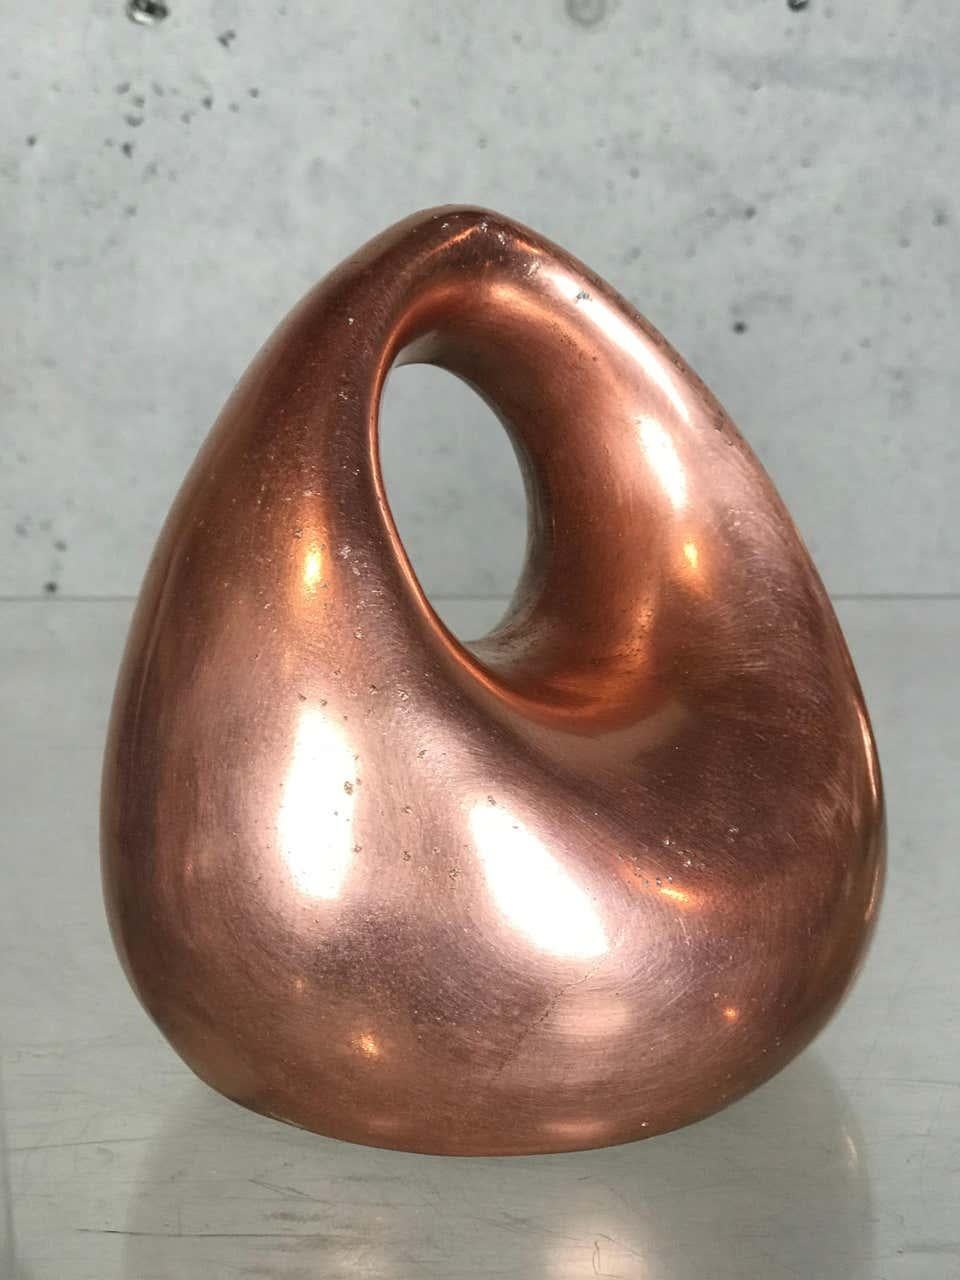 Modernist set of copper bookends by Ben Seibel for Jenfred-Ware and sold by Raymor. Cleaned/polished very well though there are minor areas of wear or use; minor marks or nicks, please see pictures. These present nicely.
Measures: 5.75